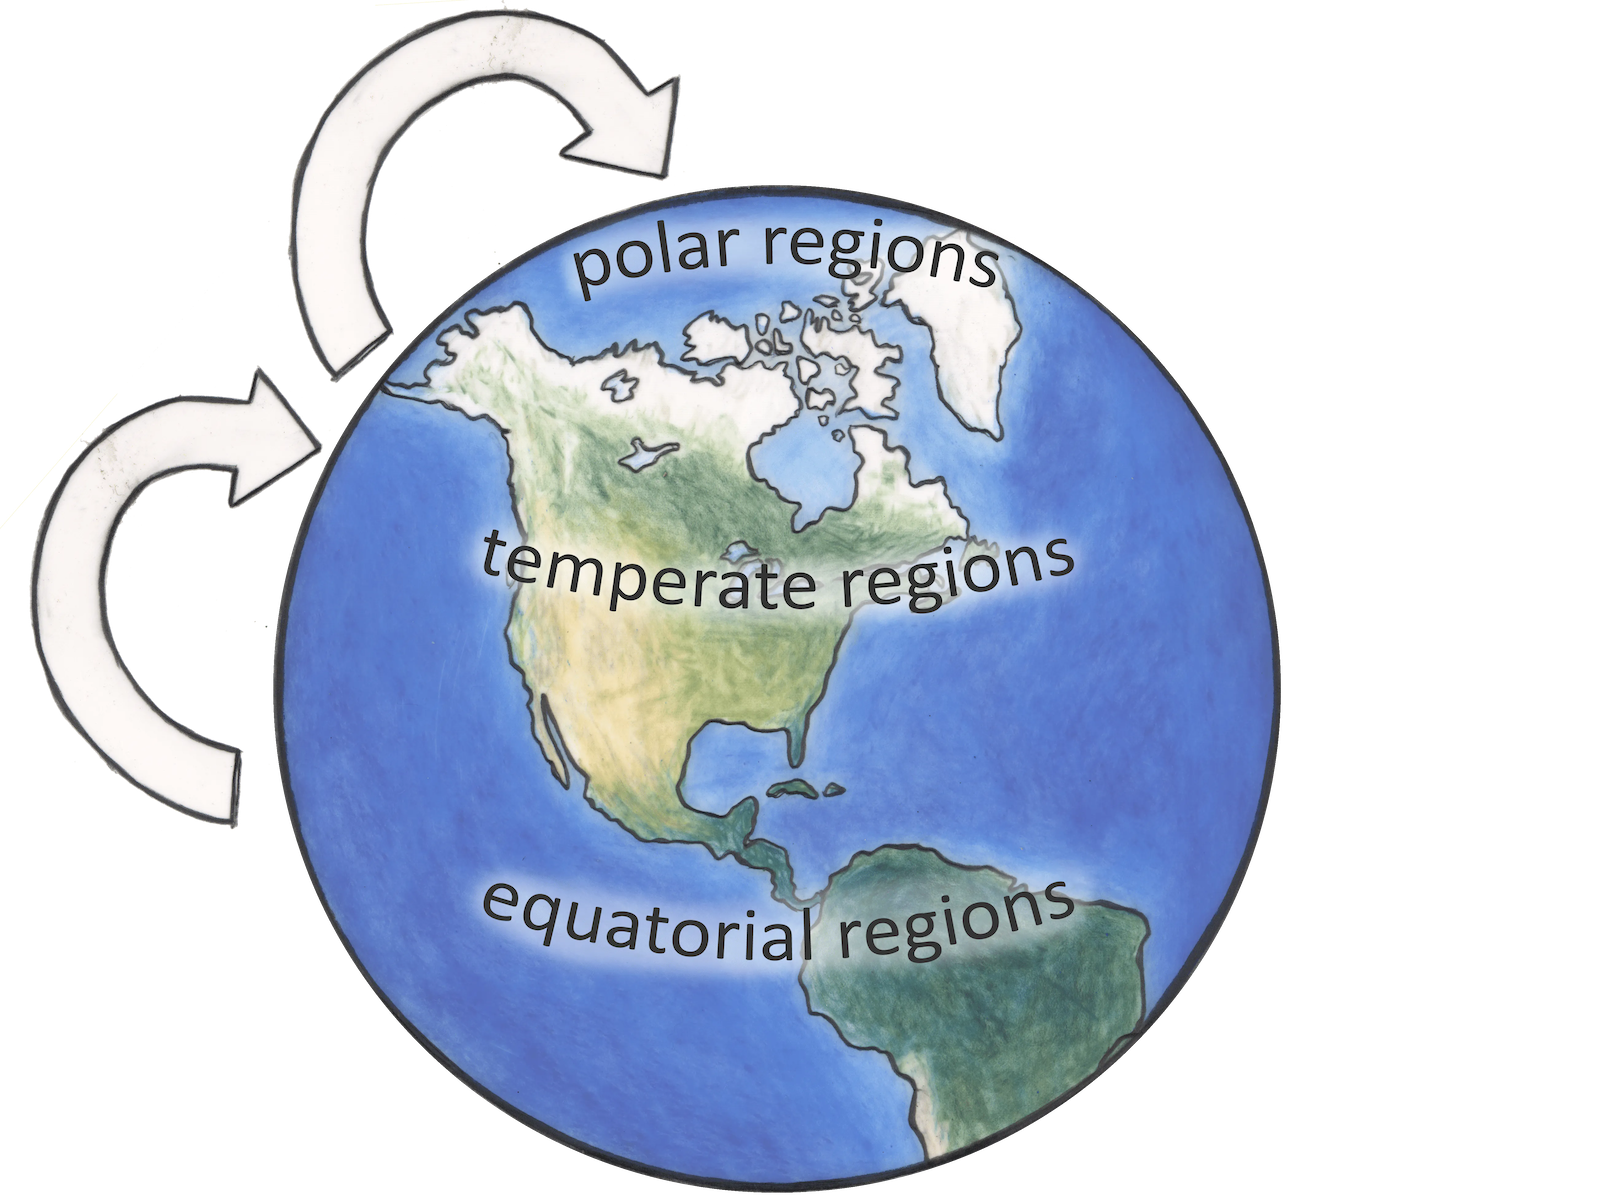 Hand drawn image of the Earth that illustrates using arrows the transport of persistent organic pollutants, which make their way from equatorial zones to temperate regions and finally to polar regions.